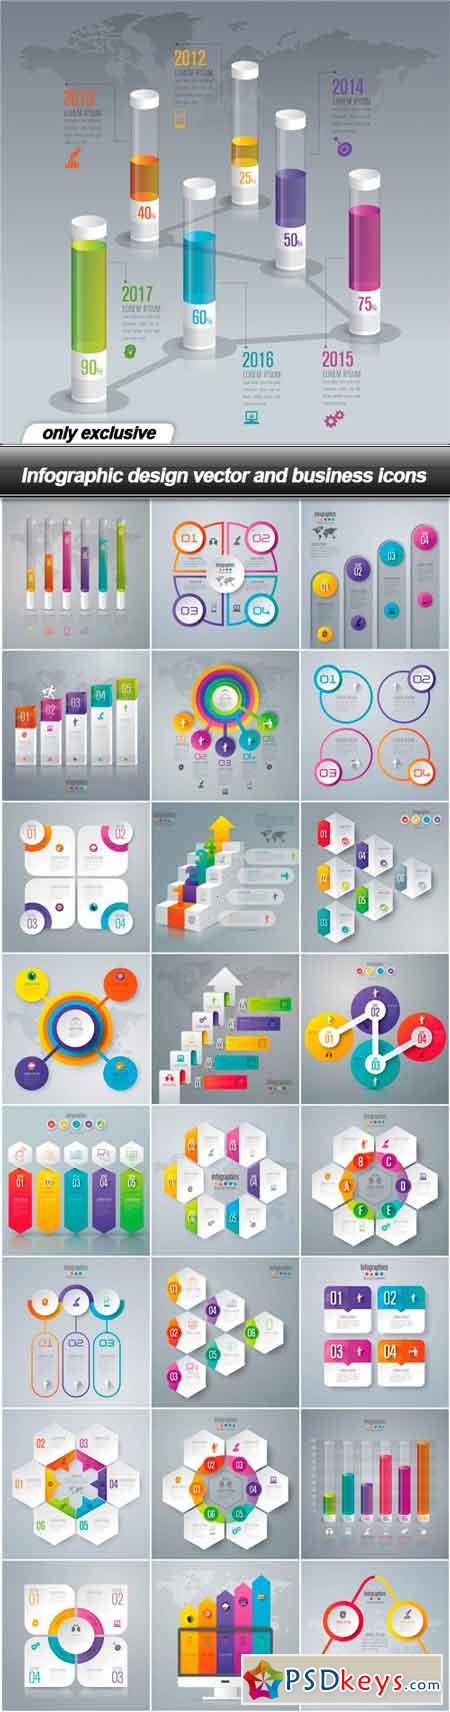 Infographic design vector and business icons - 25 EPS